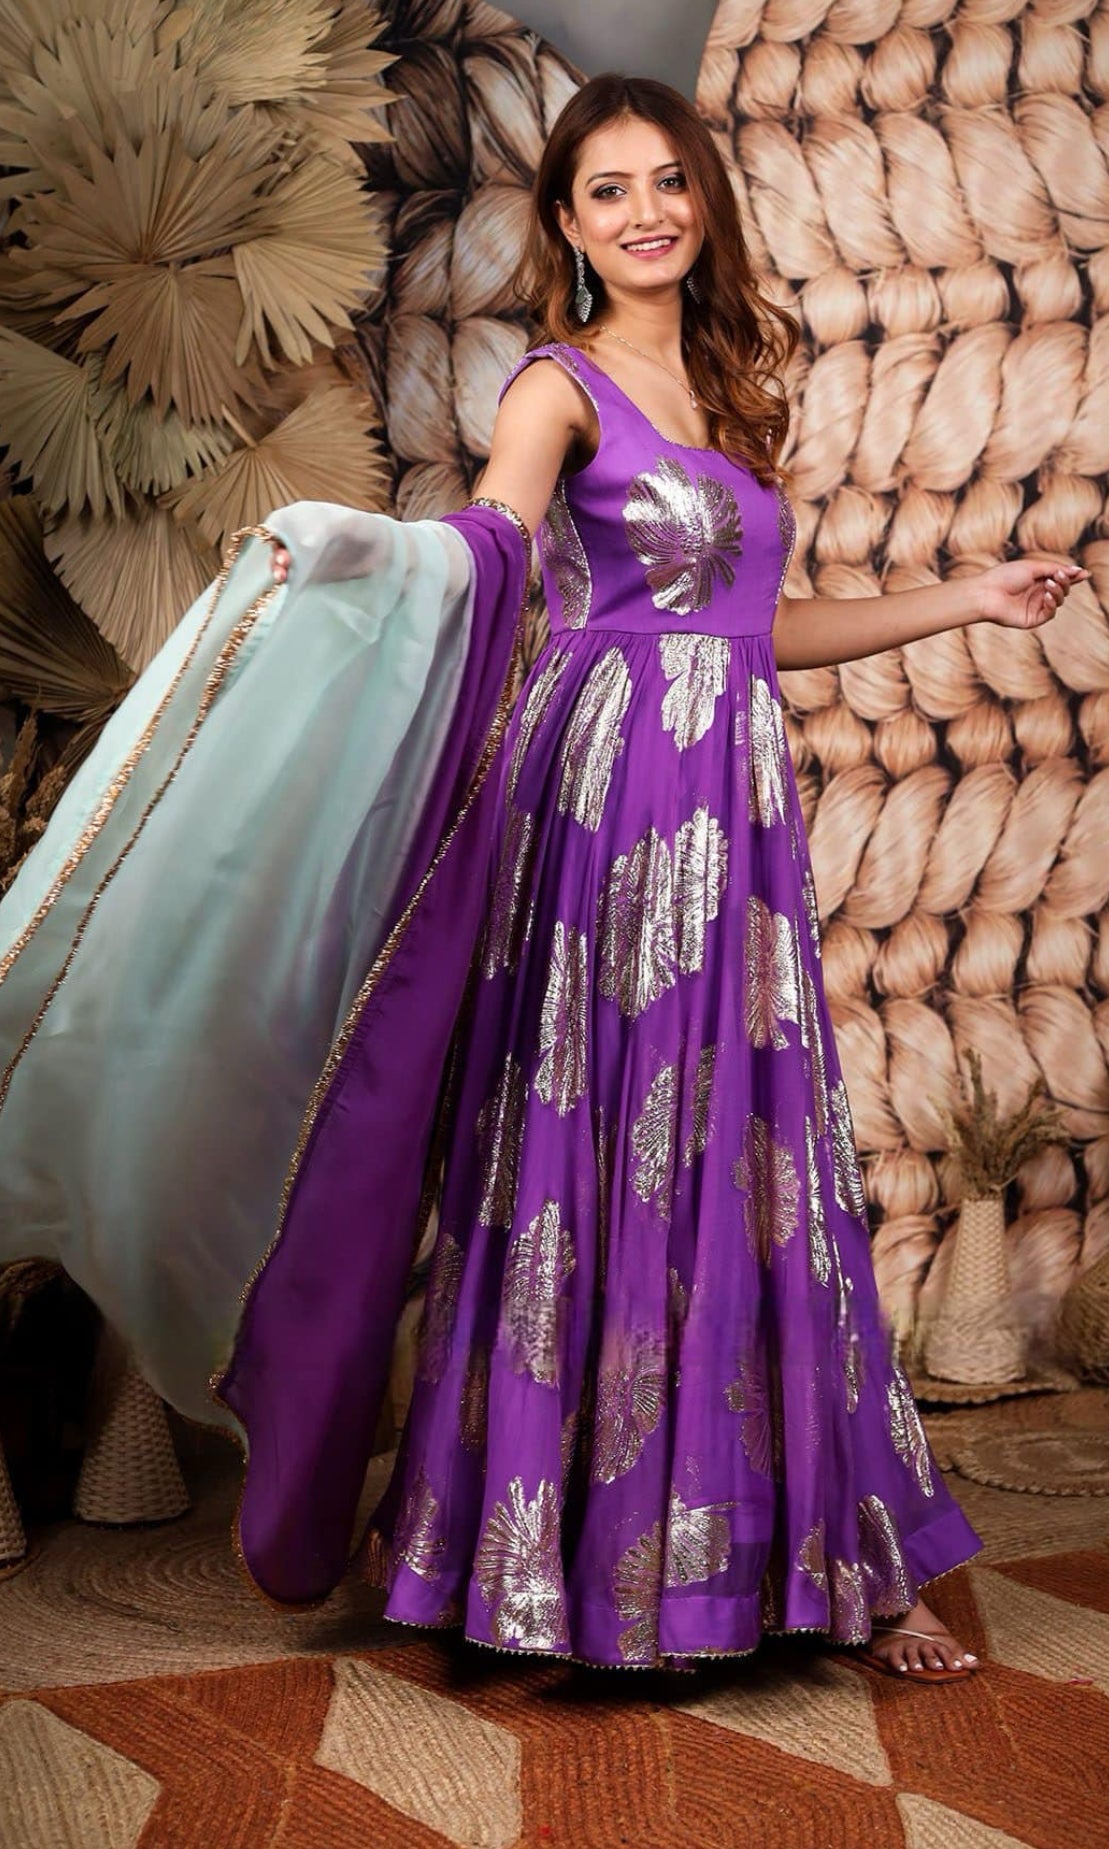 Lilac Stunning Anarkali Long Partywear Gown with Dupatta in Jacquard Georgette fabric latest design SLEEVELESS 56 inches long Perfect dress. 3 inch hands can be attached. Available in size XL 42 and 44(xxl)